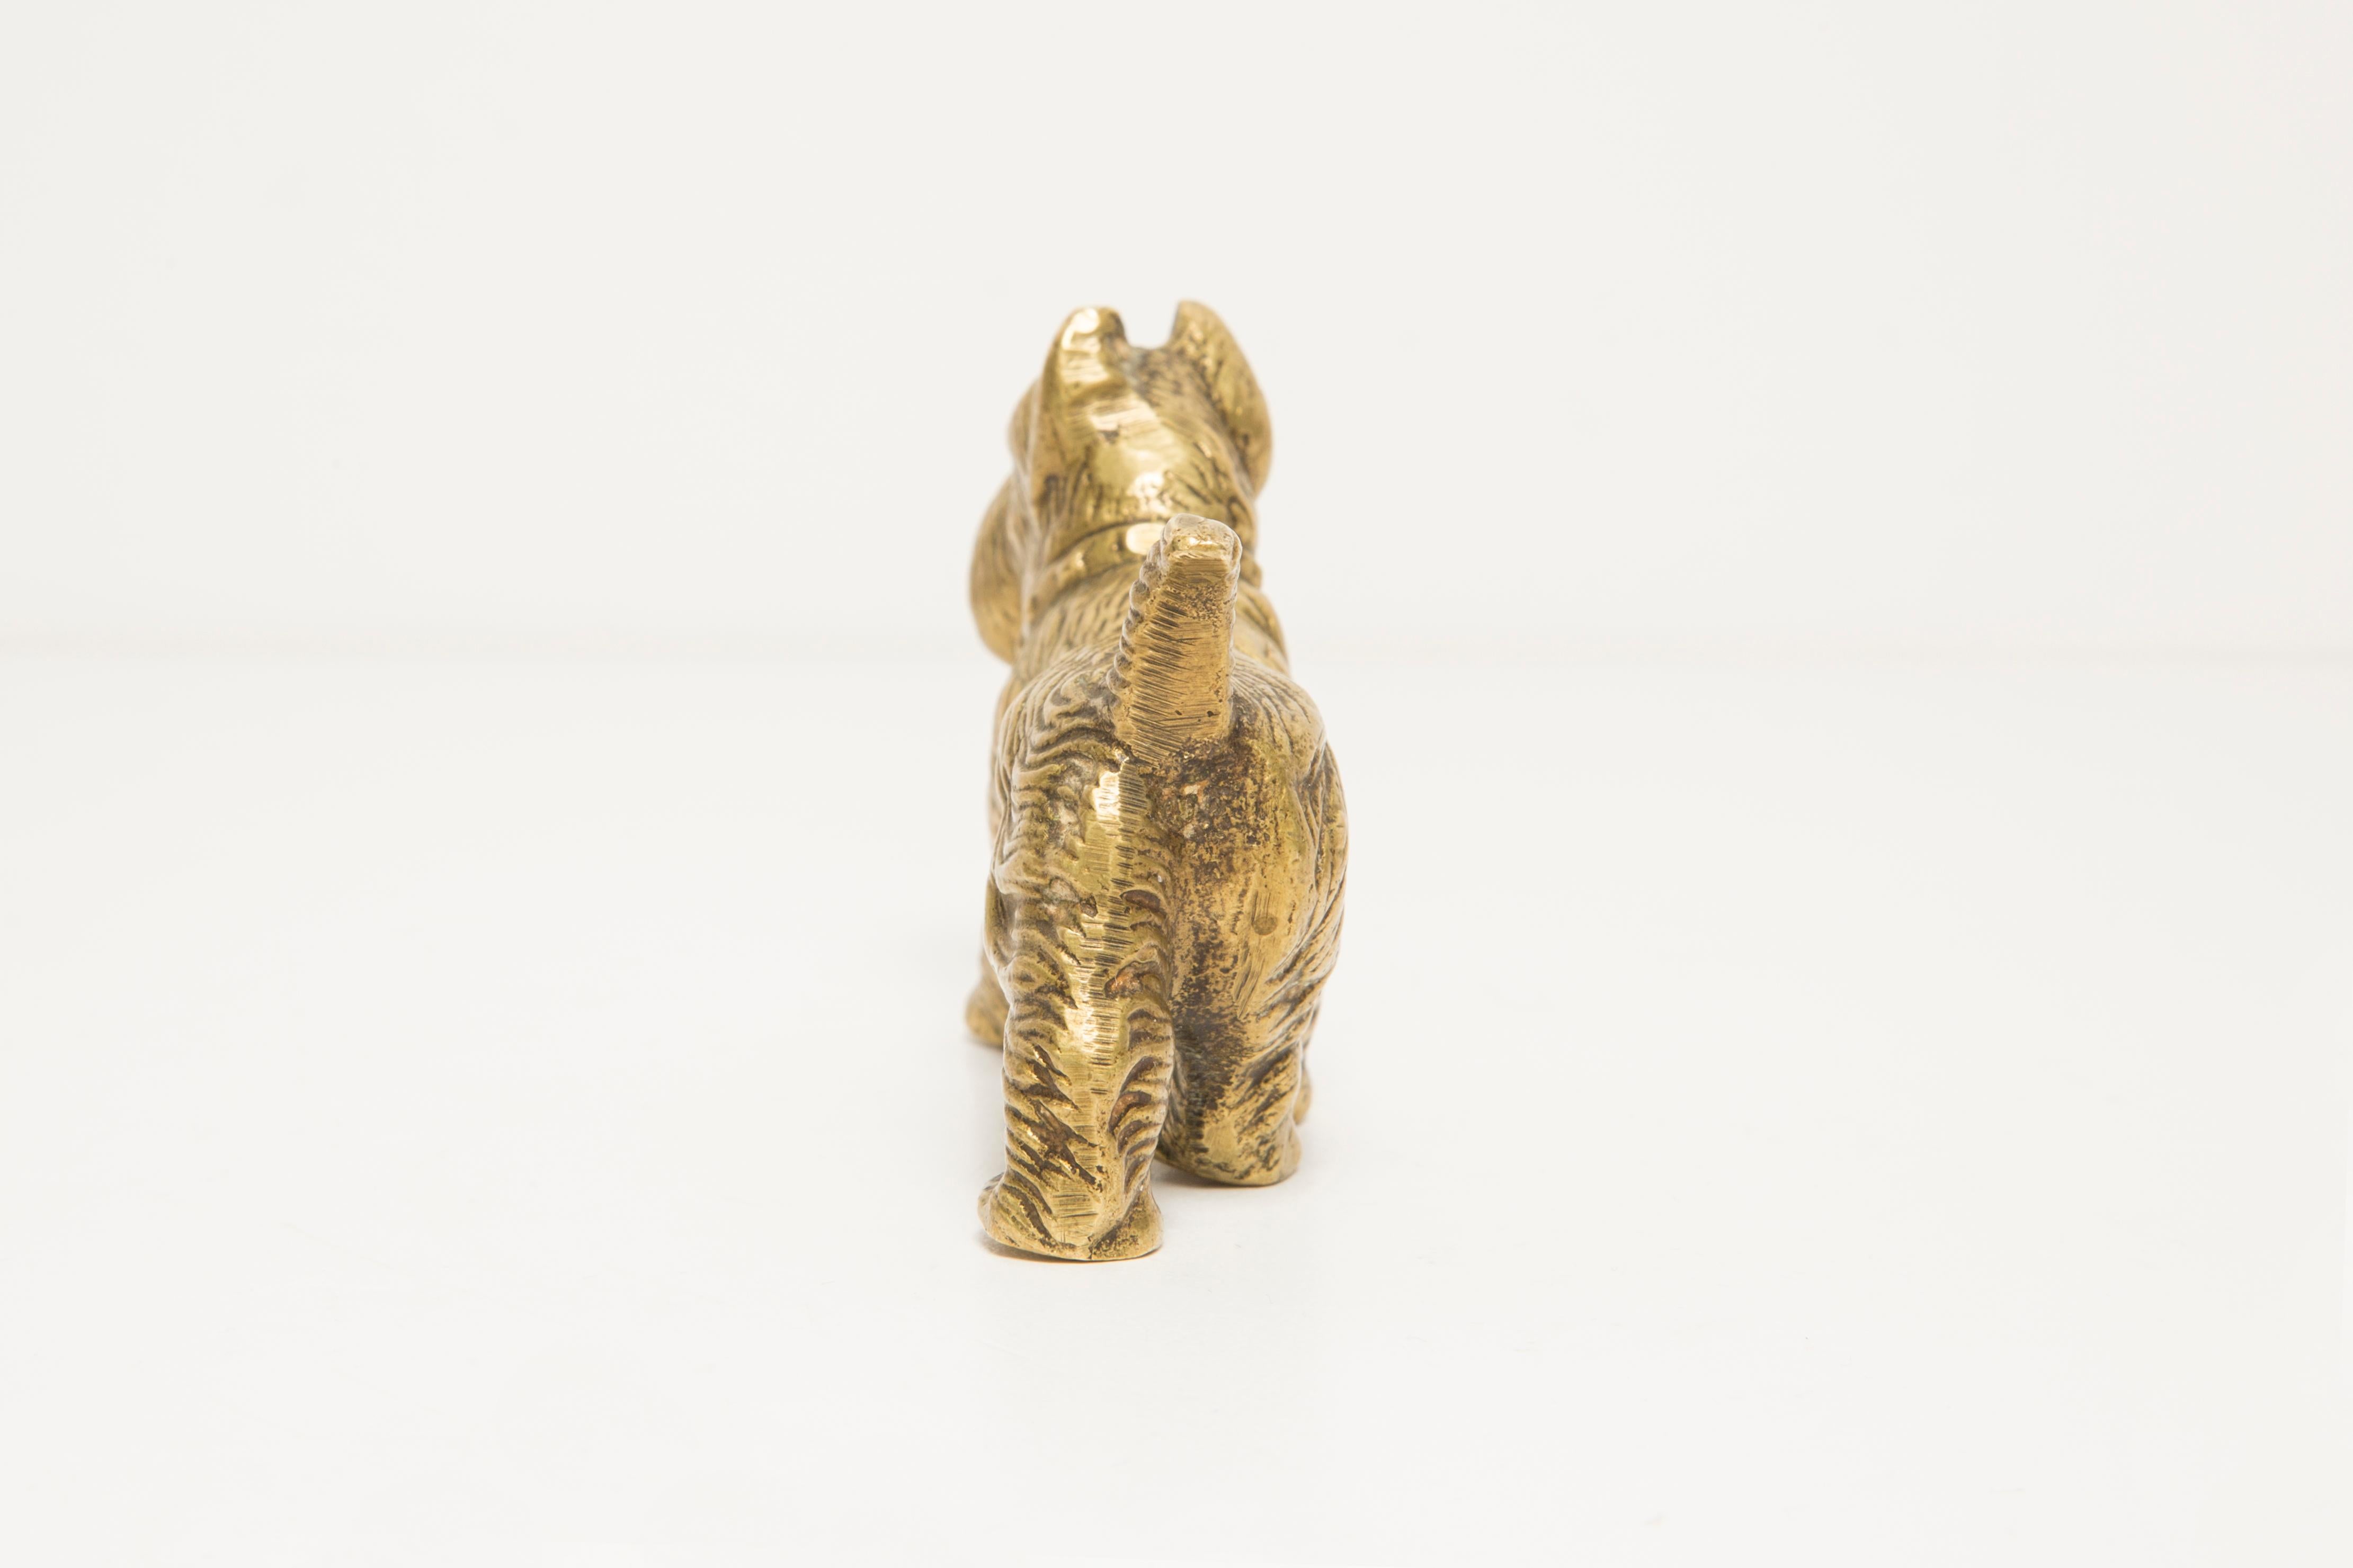 Midcentury West Terrier Dog Gold Metal Decorative Sculpture, Italy, 1950s For Sale 3